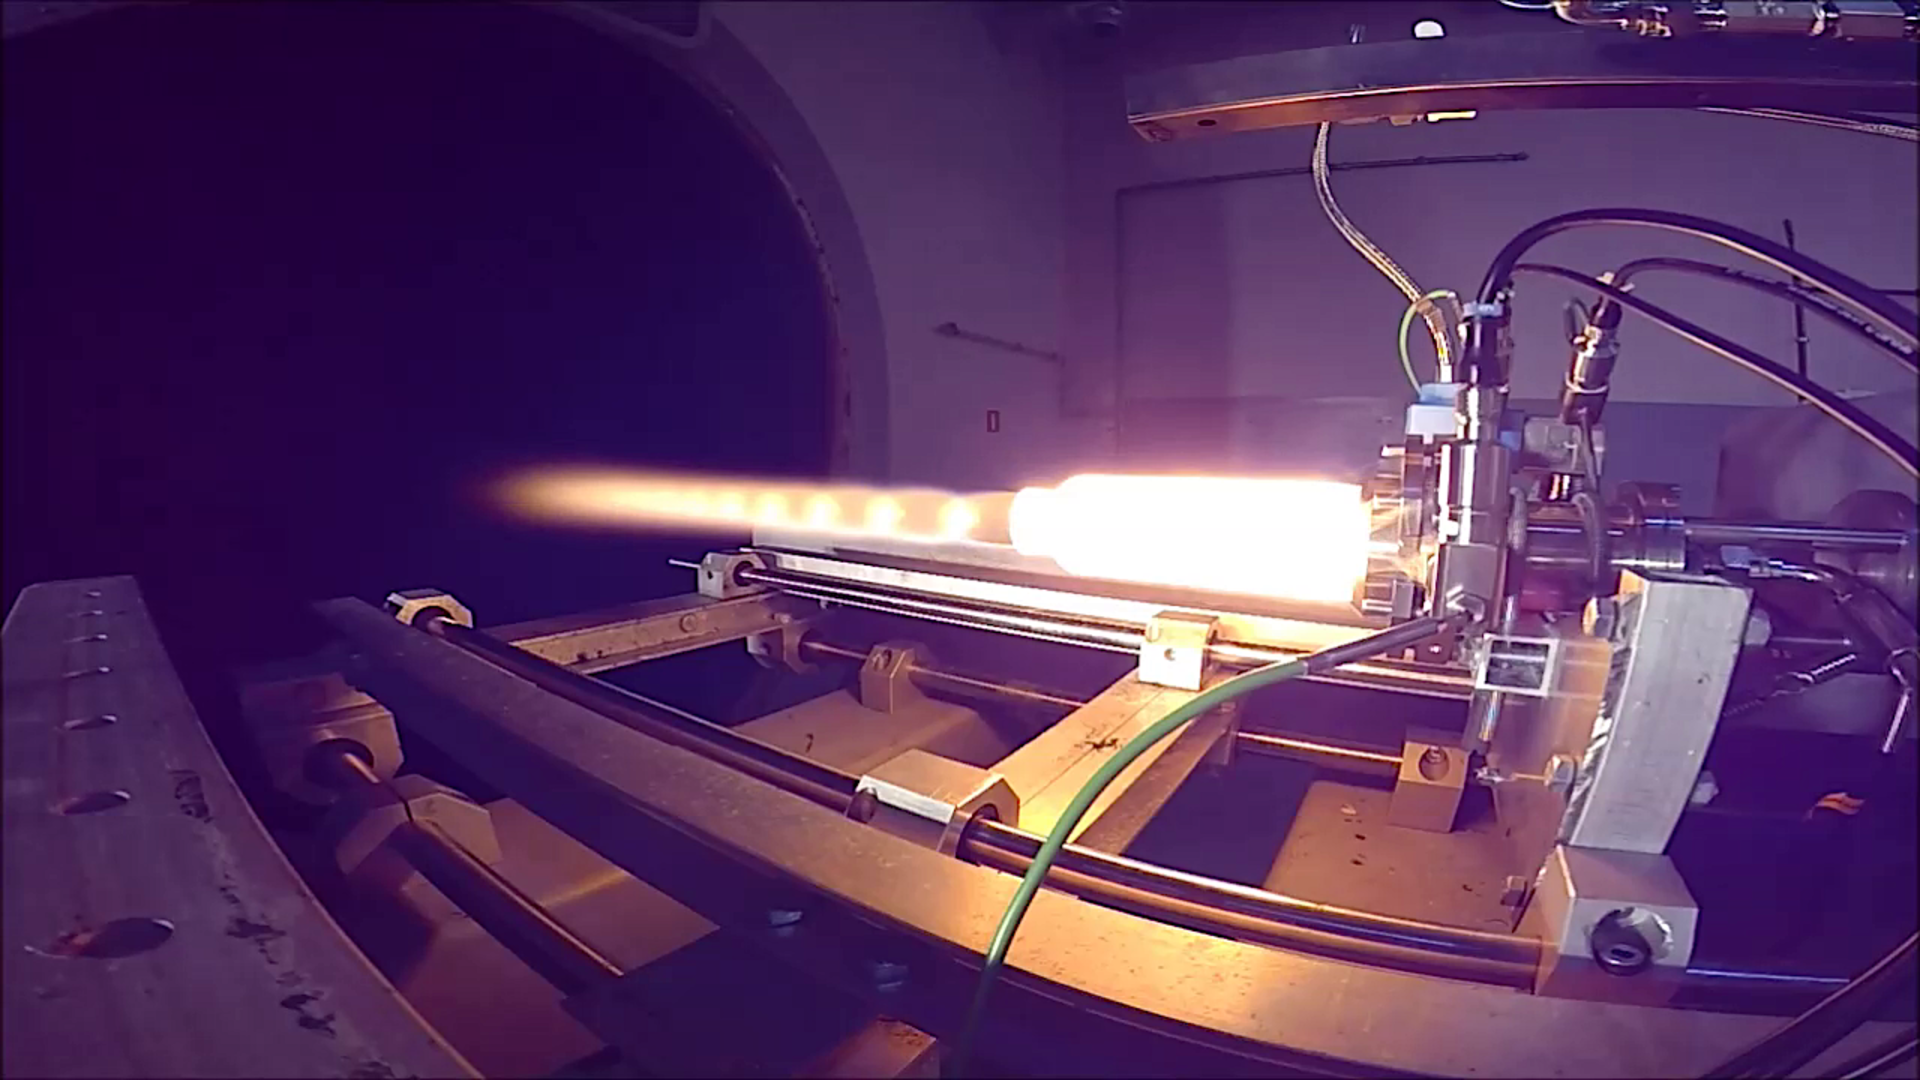 Test of bi-propellant thruster with pintle injector